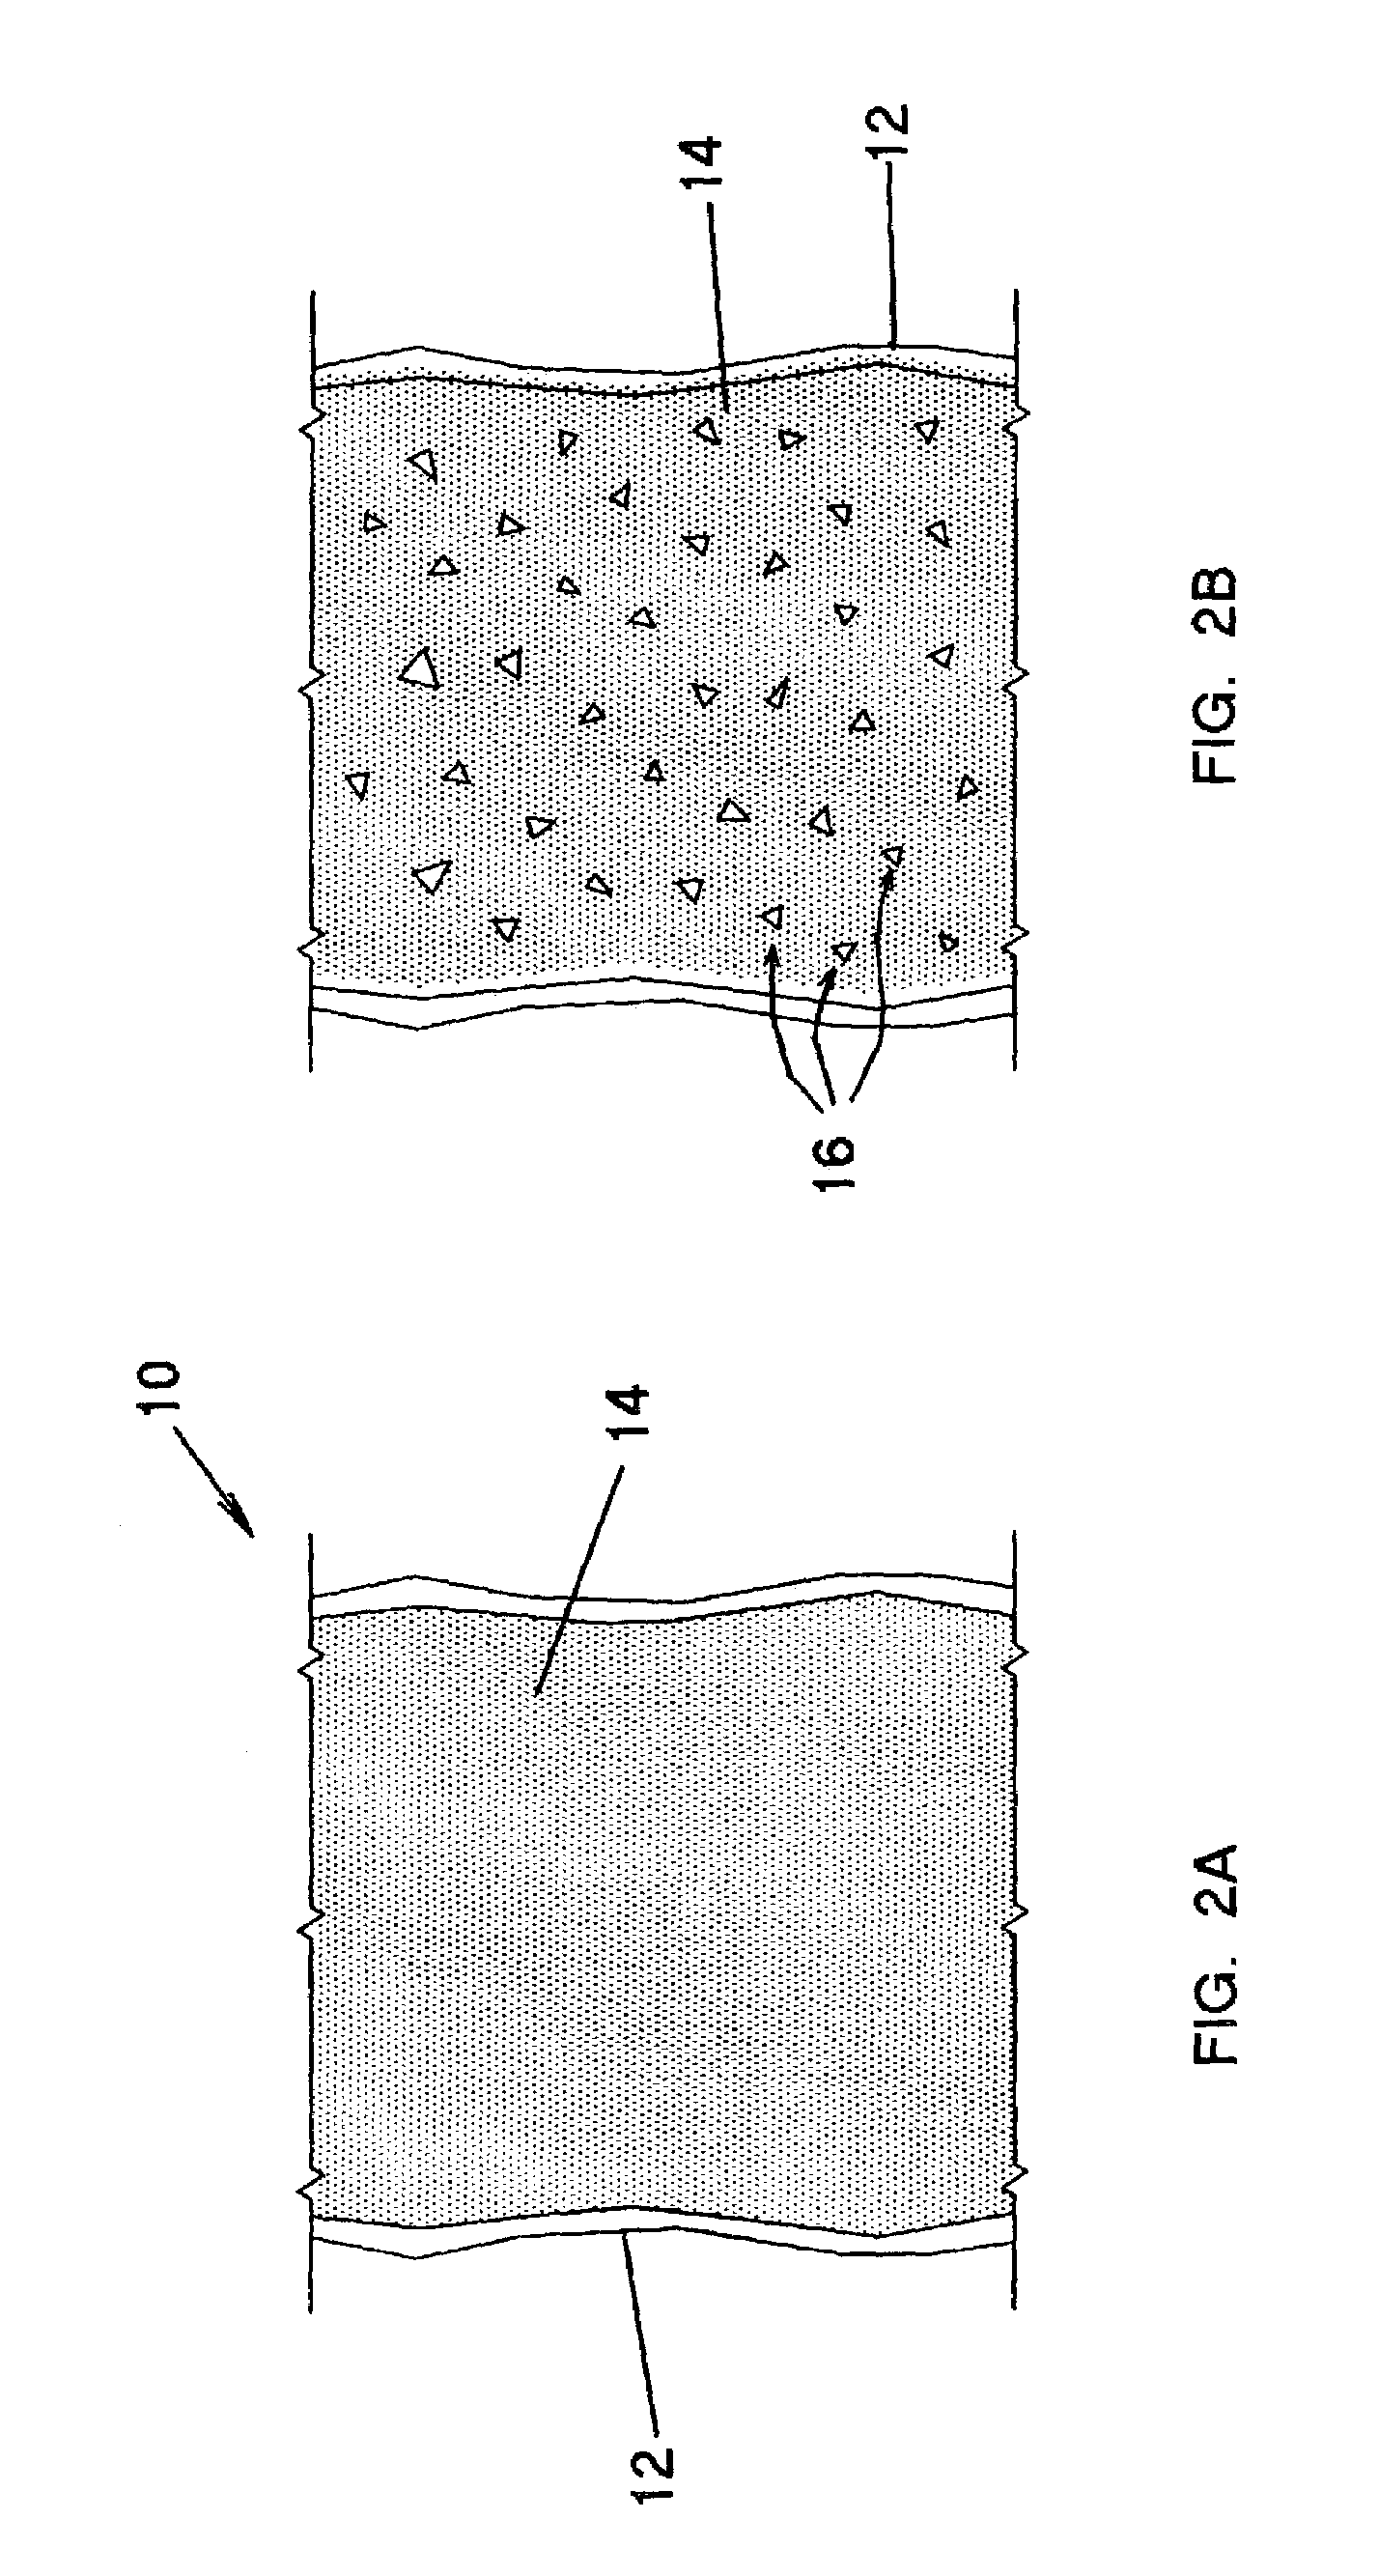 Method of increasing latent heat storage of wood products